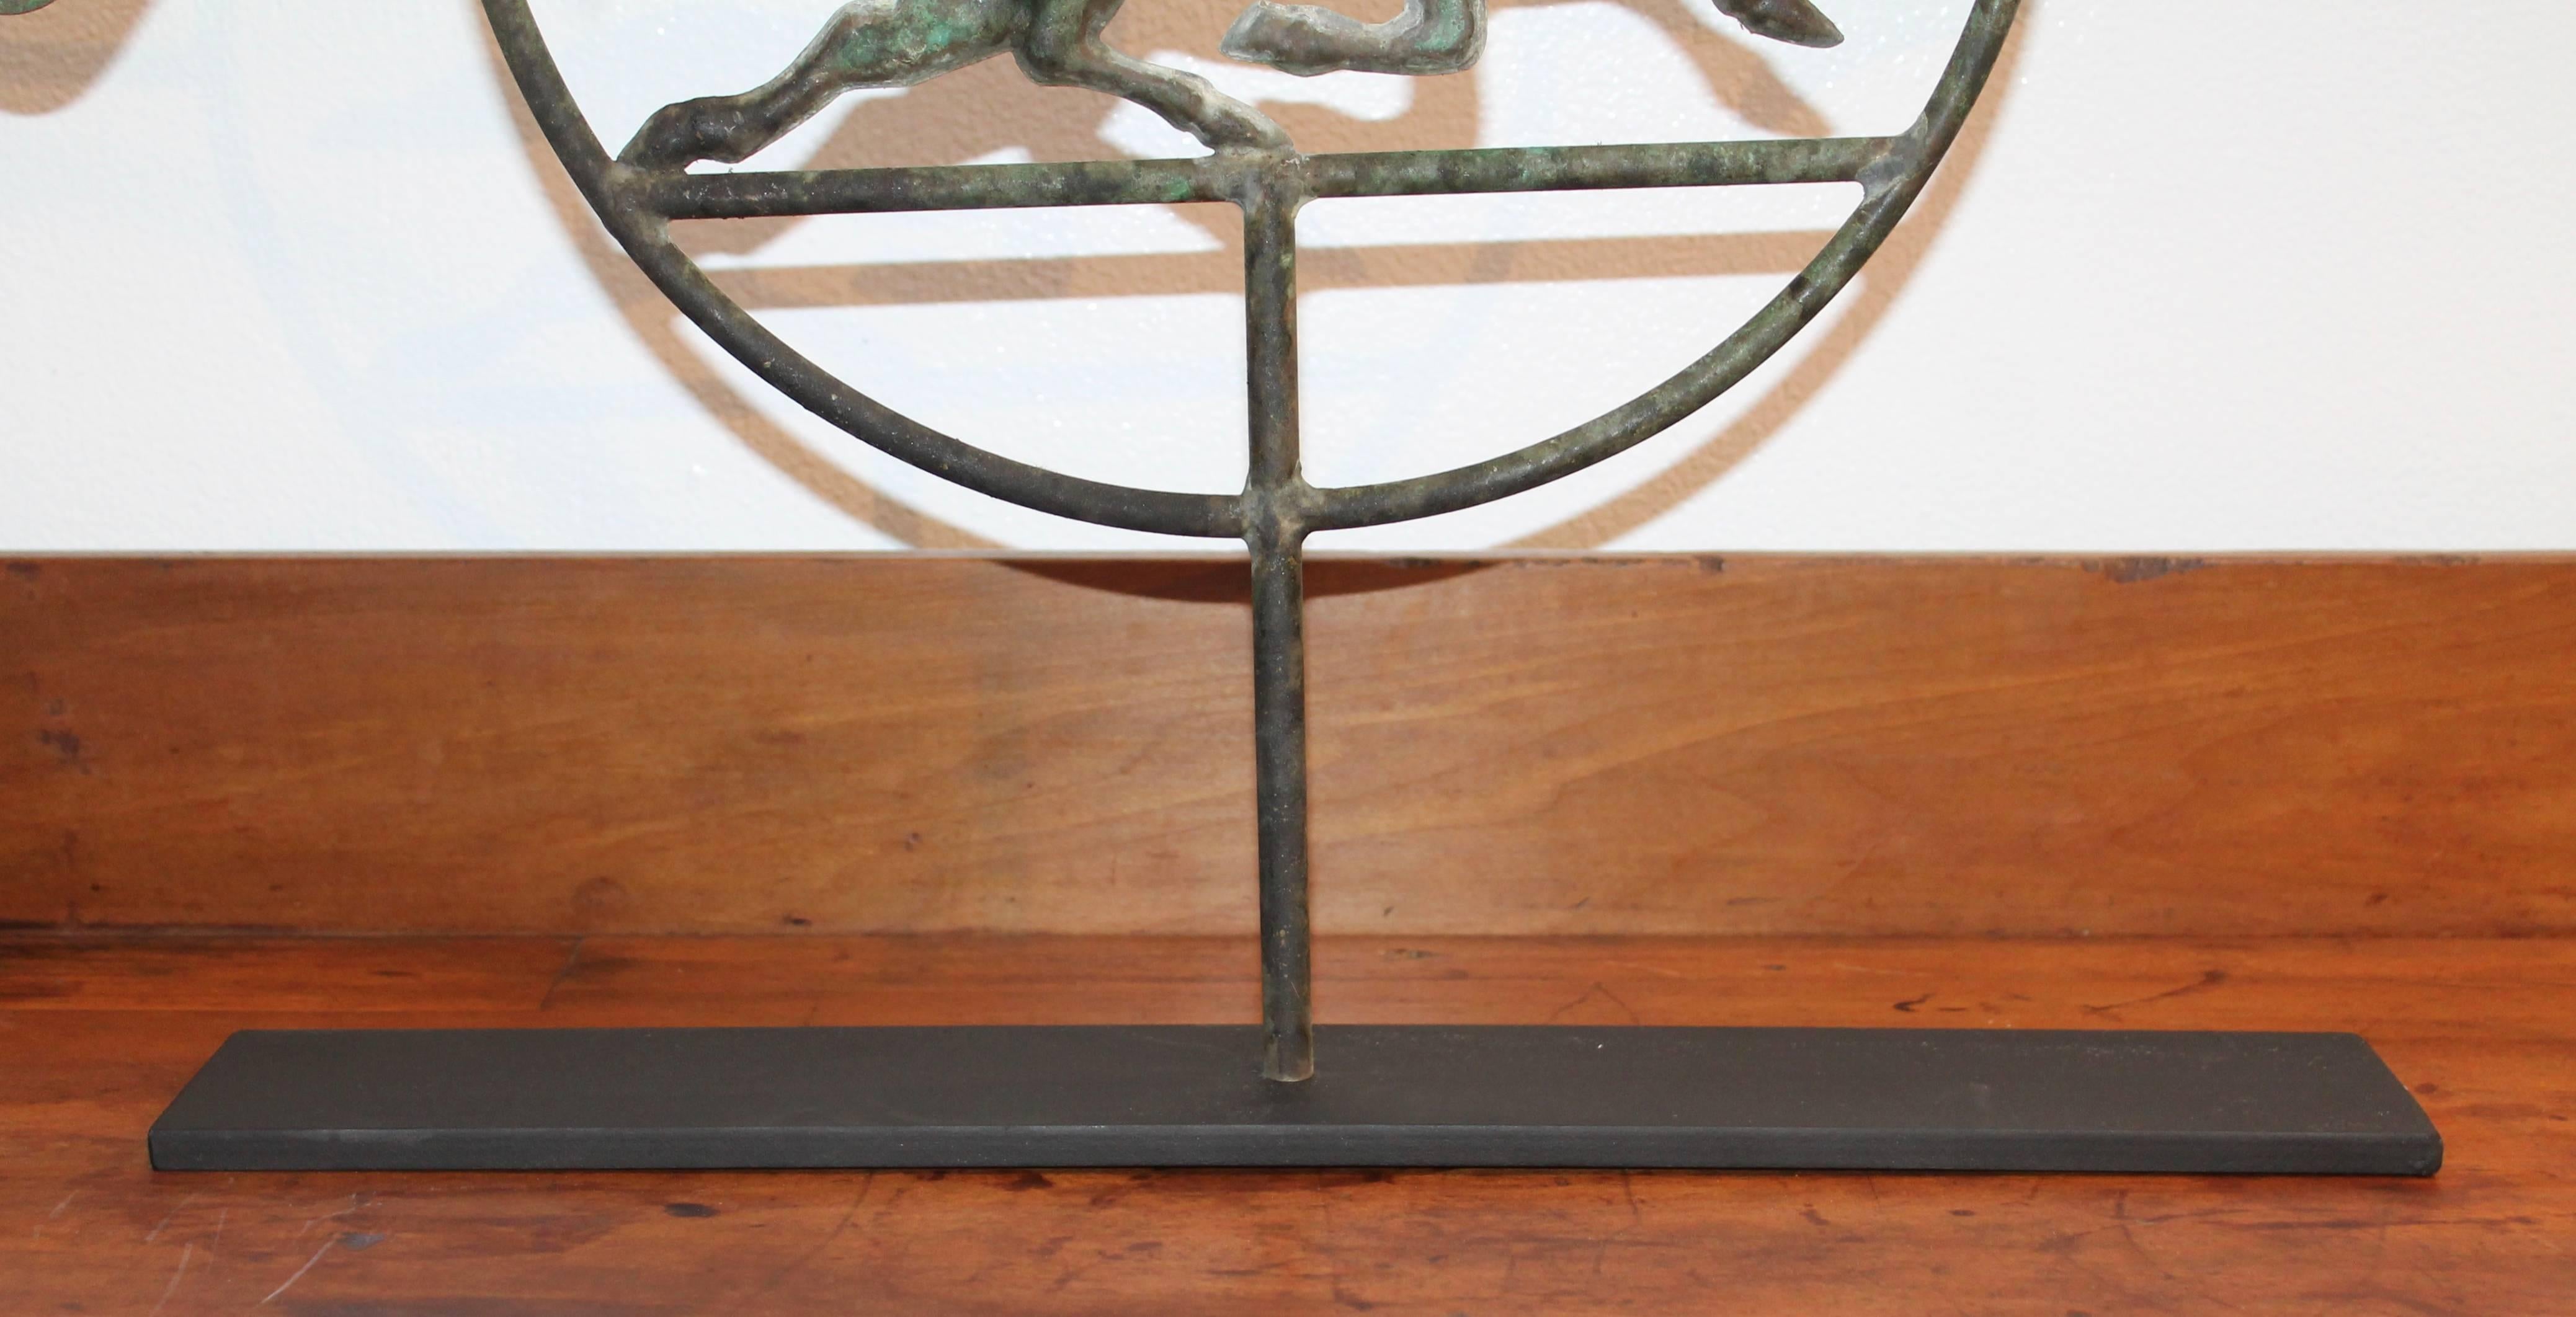 Patinated 19th Century Running Horse within a Circle Weathervane on Stand